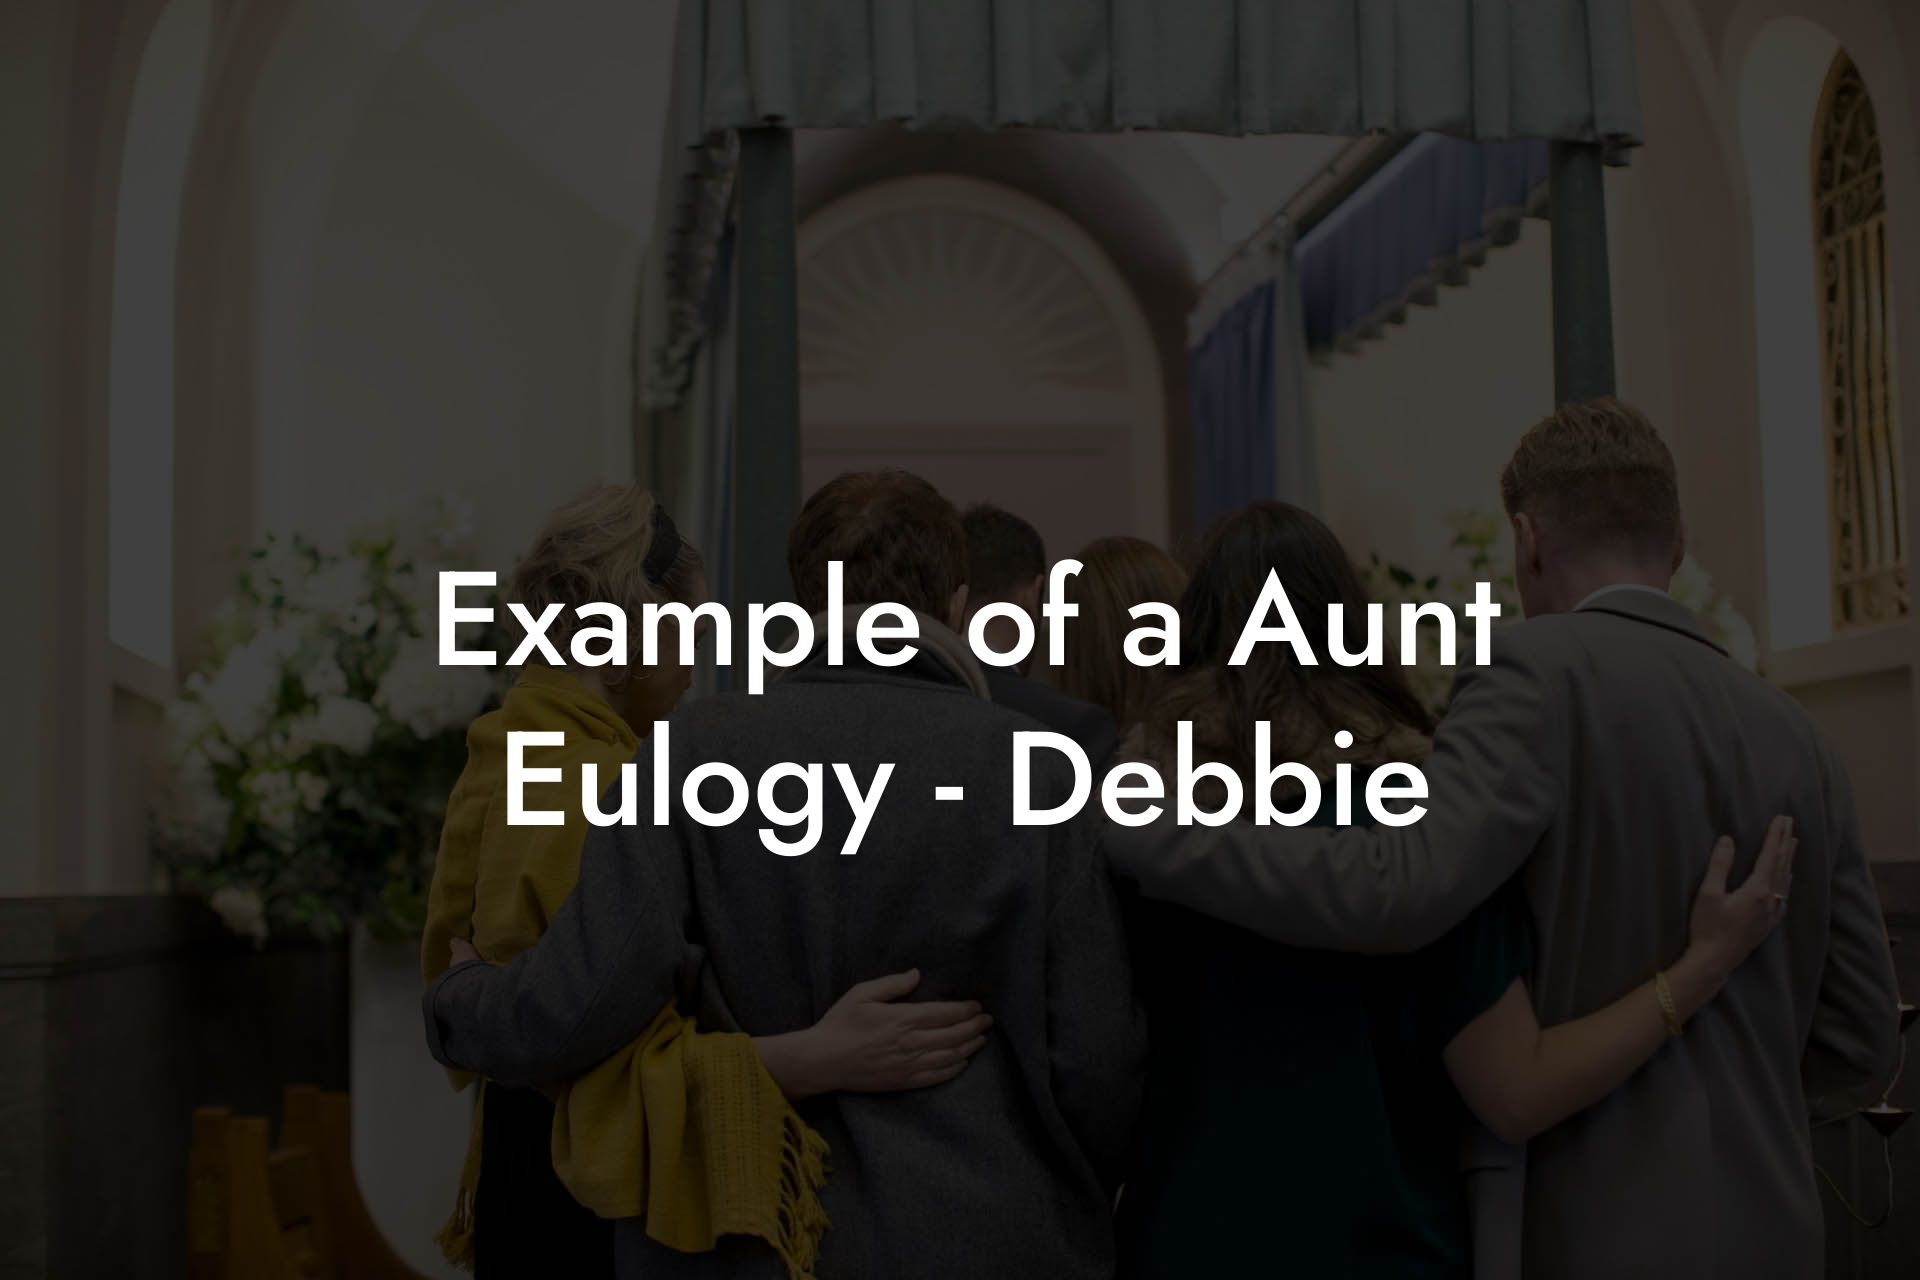 Example of a Aunt Eulogy - Debbie